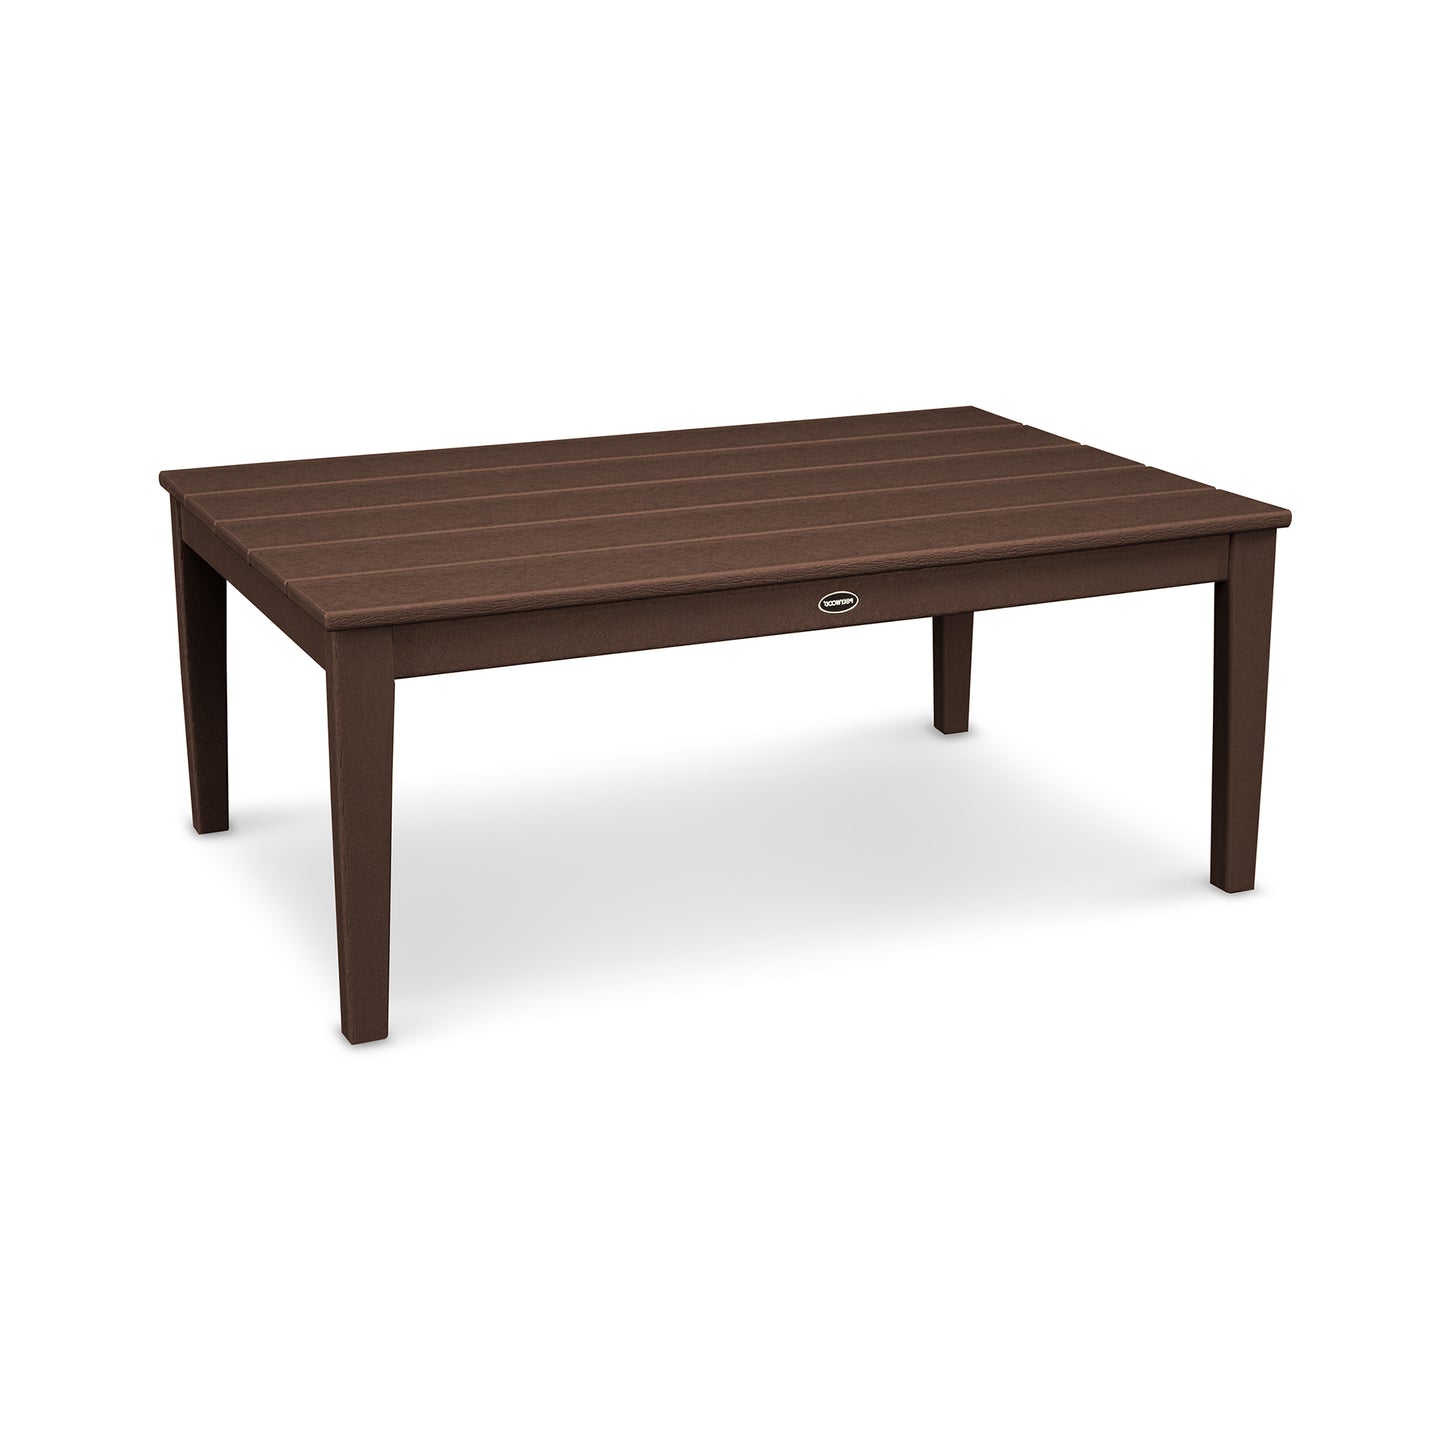 A rectangular POLYWOOD® Newport 28" x 42" coffee table made of brown synthetic wood, featuring a simple, sturdy design with four legs and a small round logo on one side.